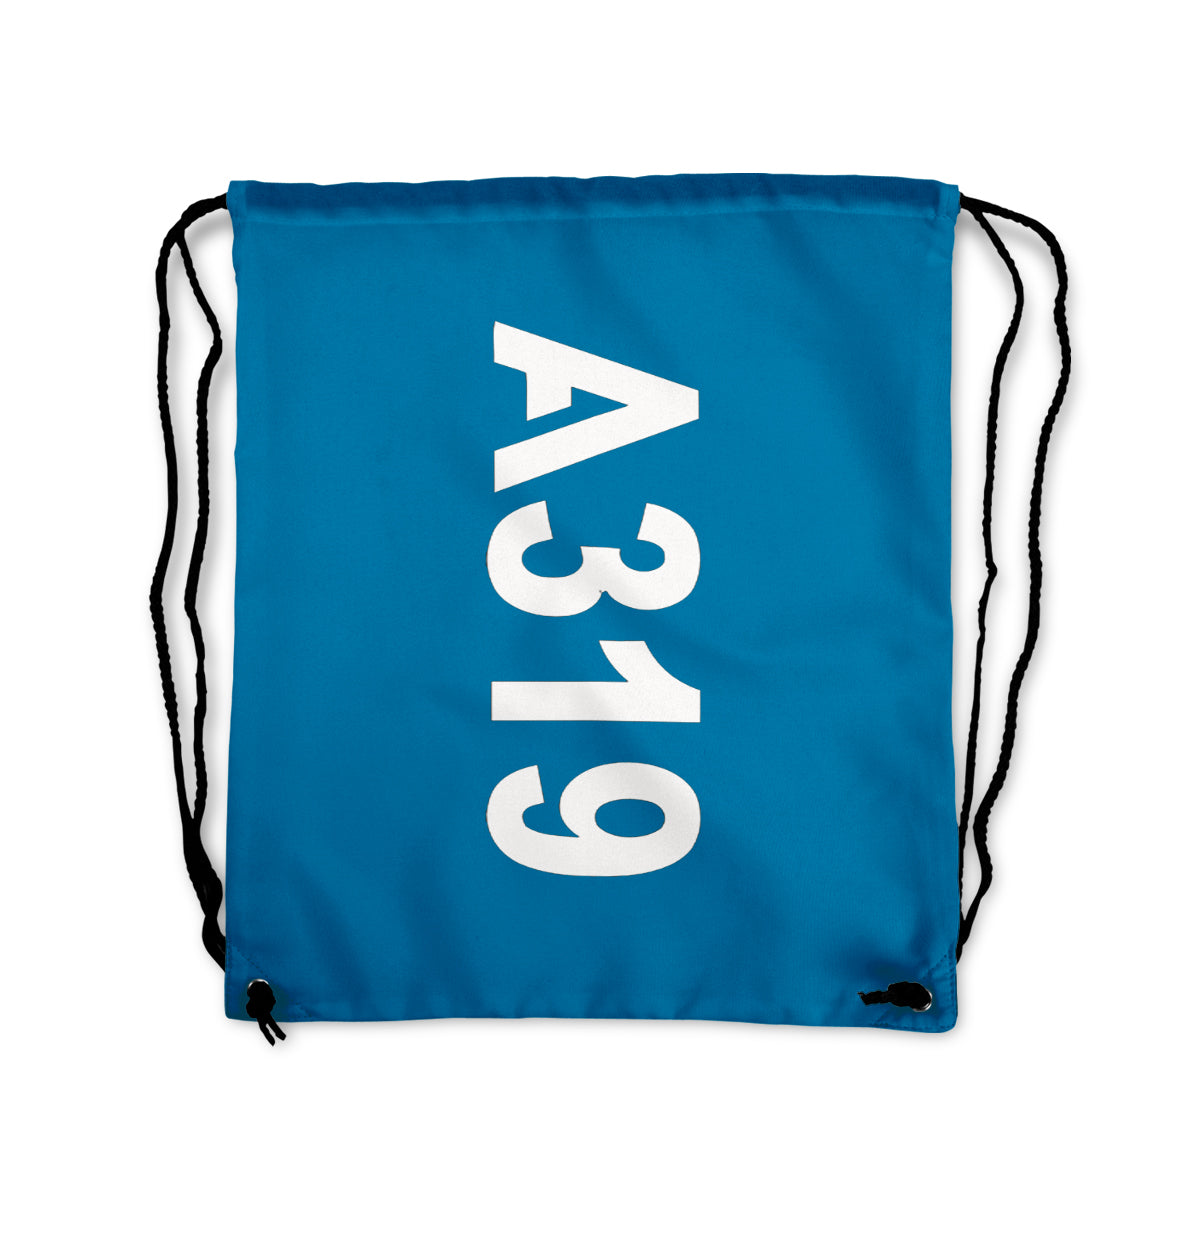 A319 Text Designed Drawstring Bags